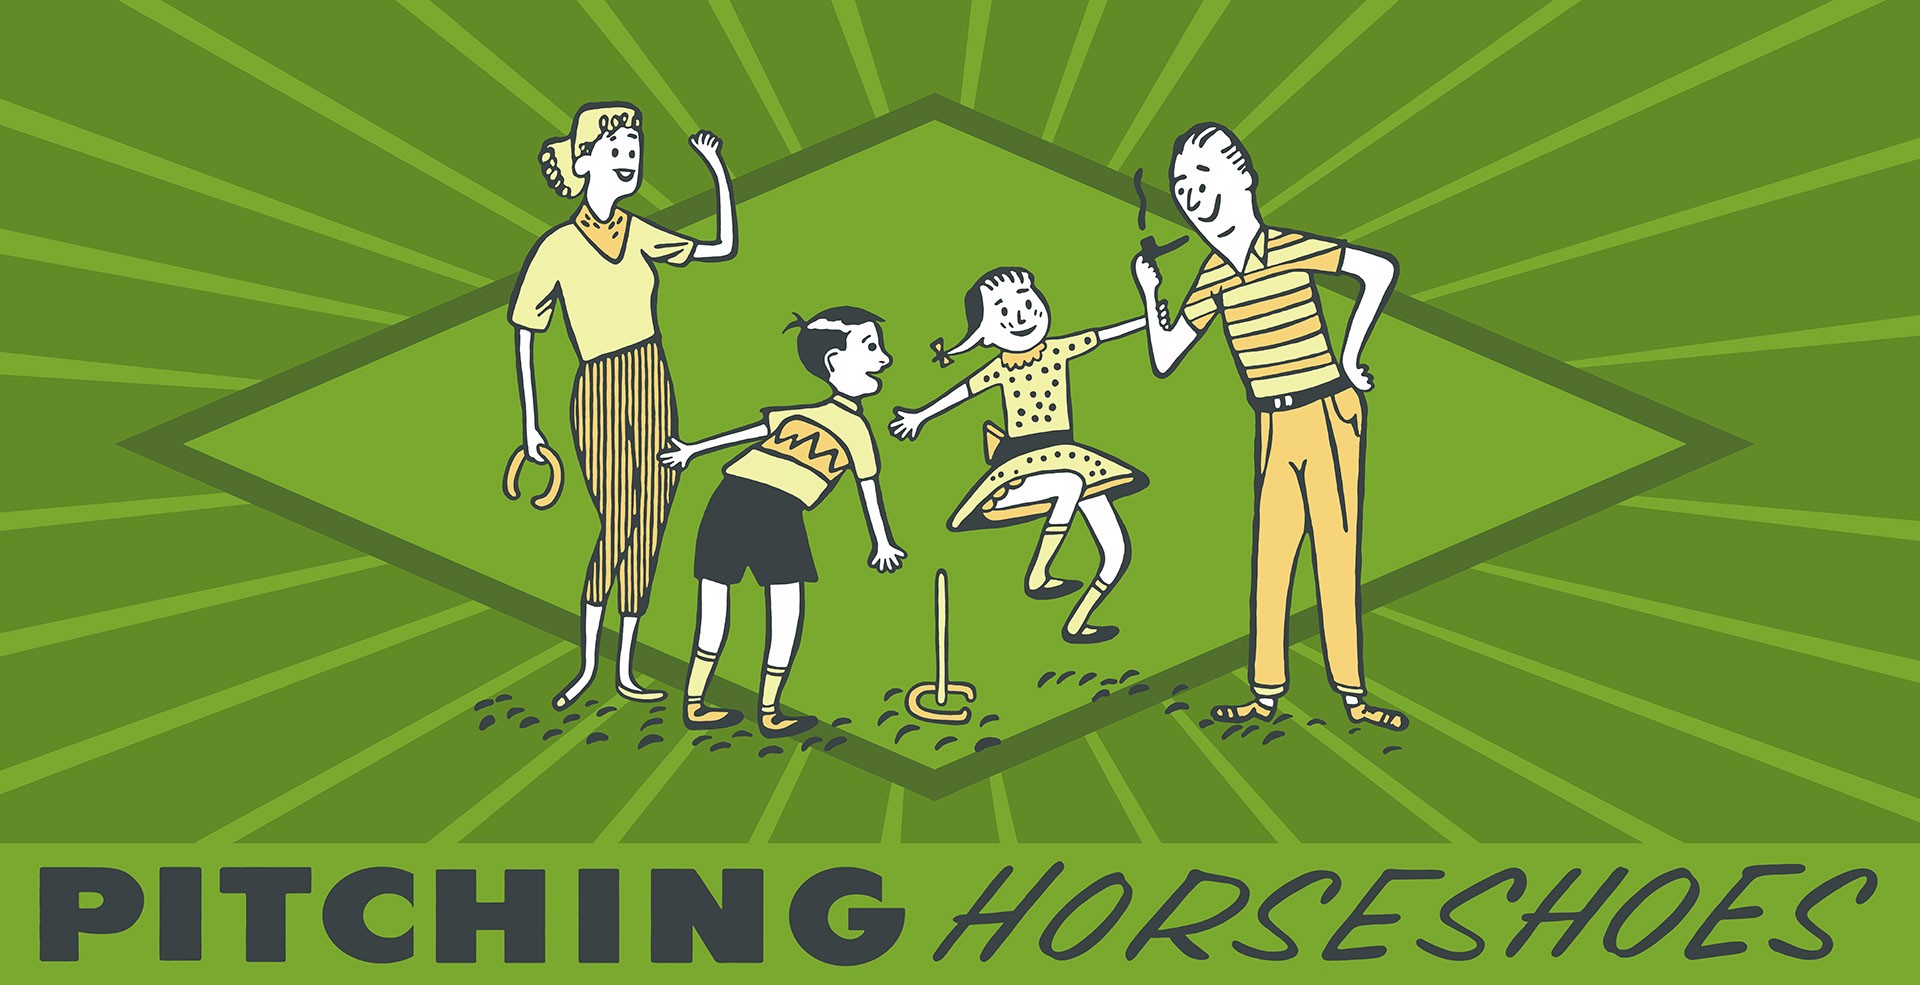 Pitching Horseshoes by Mark Hosford